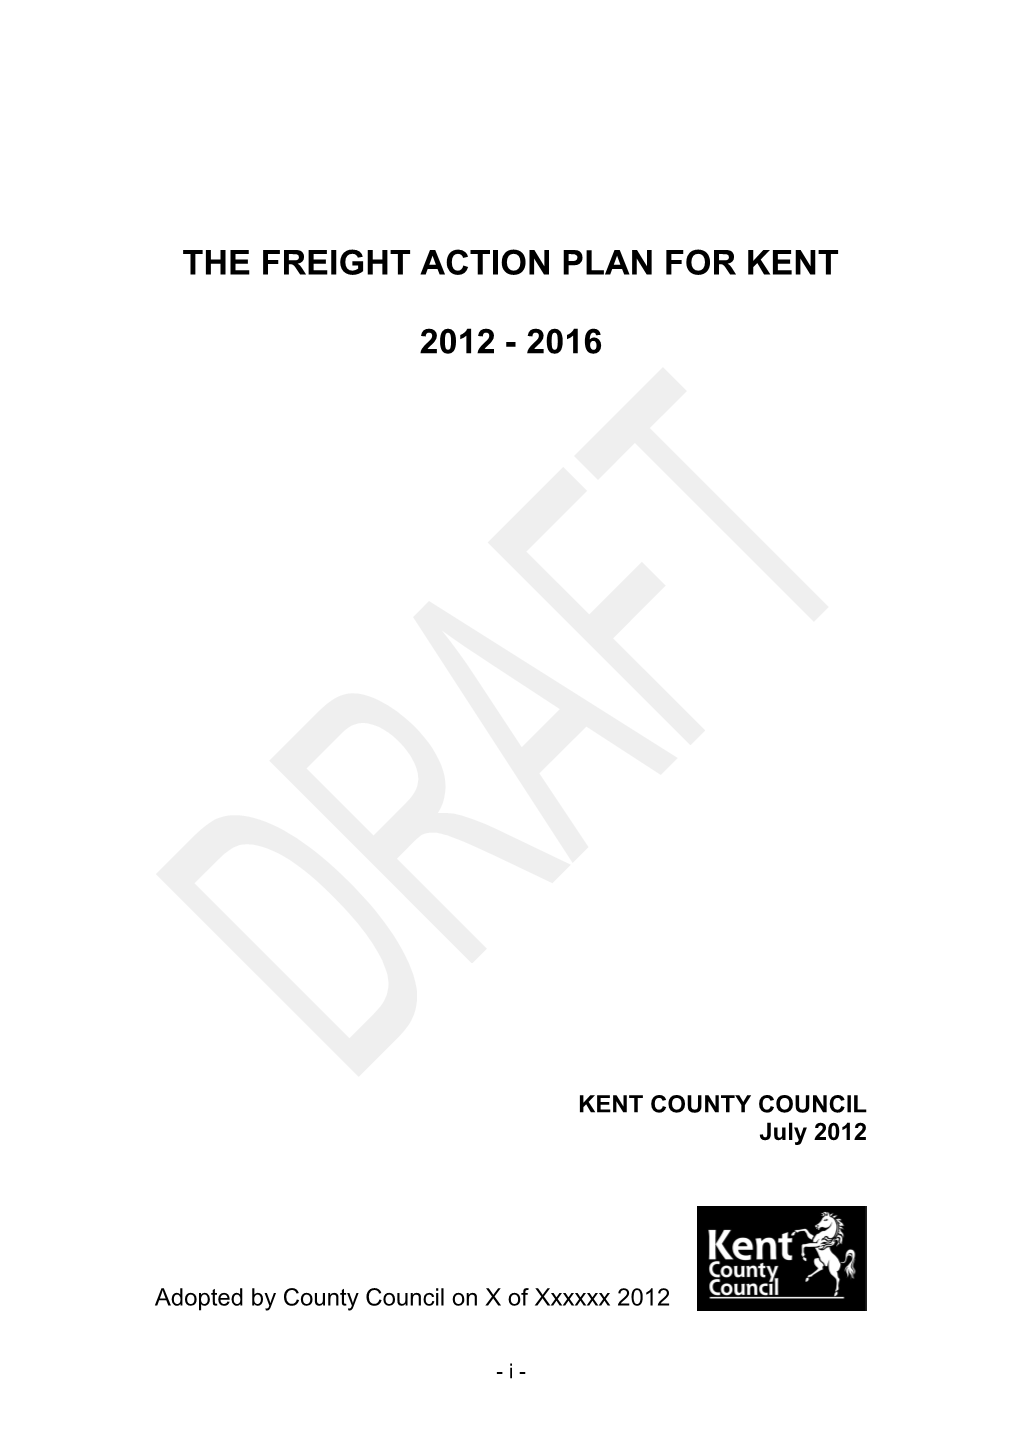 The Freight Action Plan for Kent